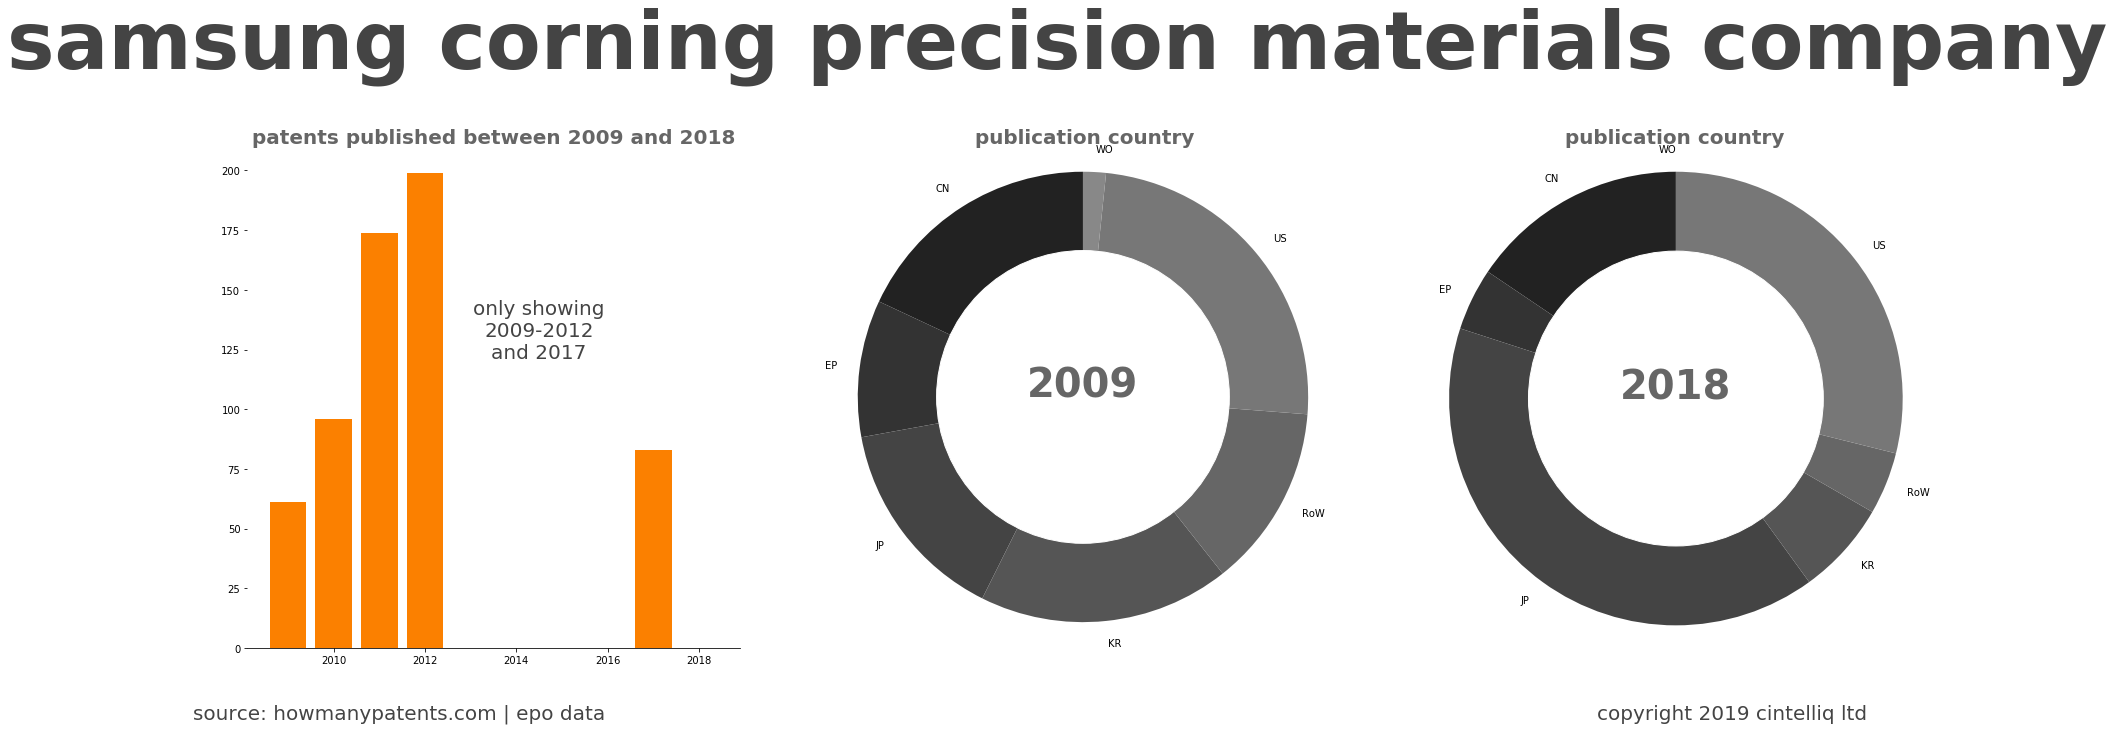 summary of patents for Samsung Corning Precision Materials Company